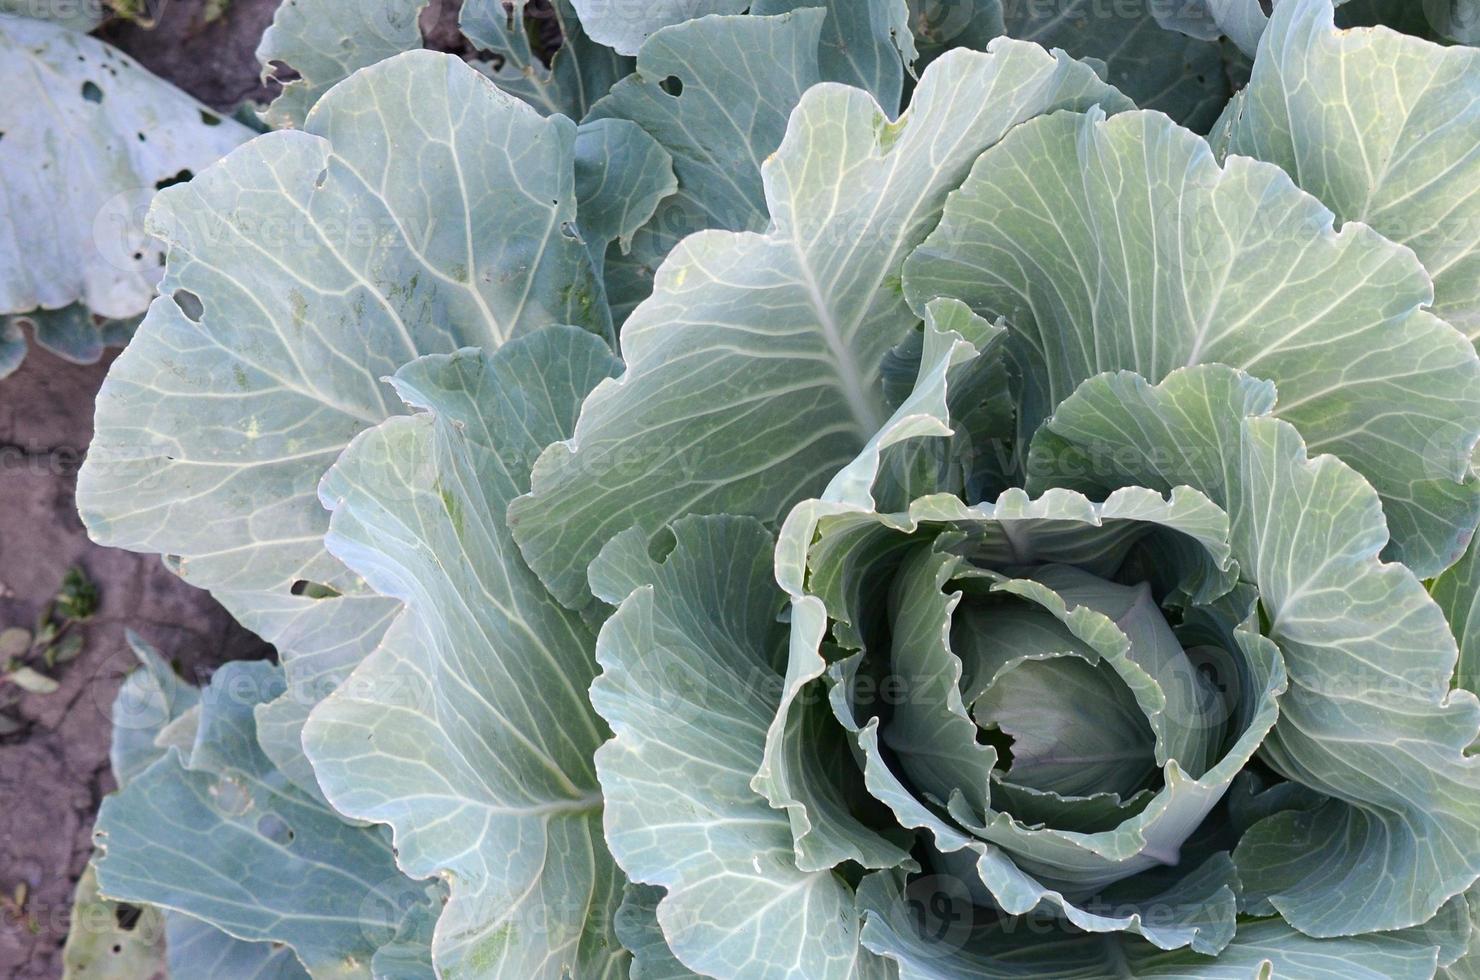 Green cabbage maturing head growing in vegetable farm photo